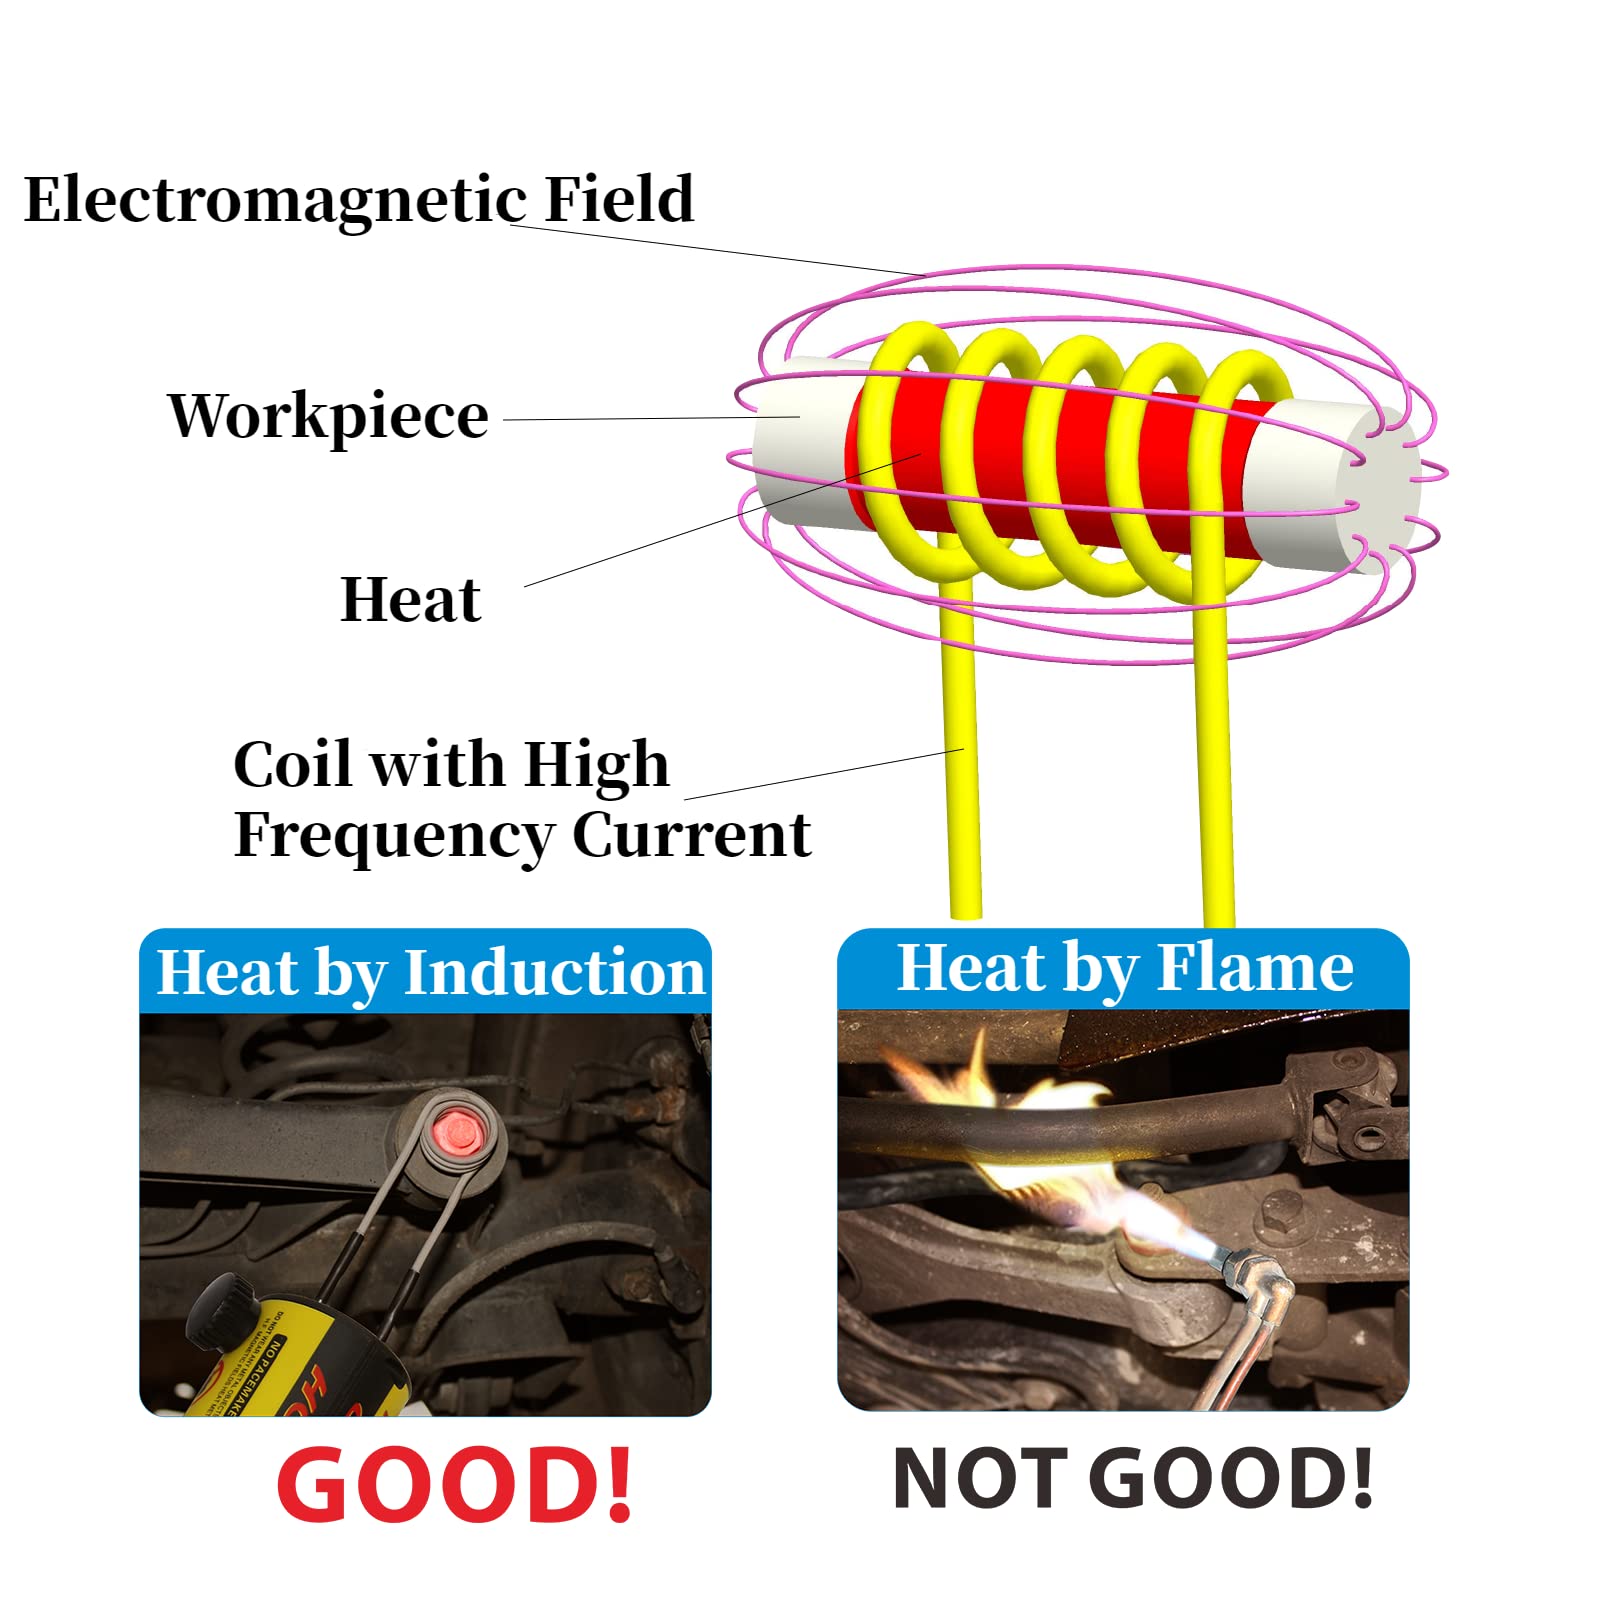 Solary Magnetic Induction Heater Coil, Flameless Induction Heat Accessories (7 coils + 1 free forming coil) - Auto Body Collision Repair Welding Products